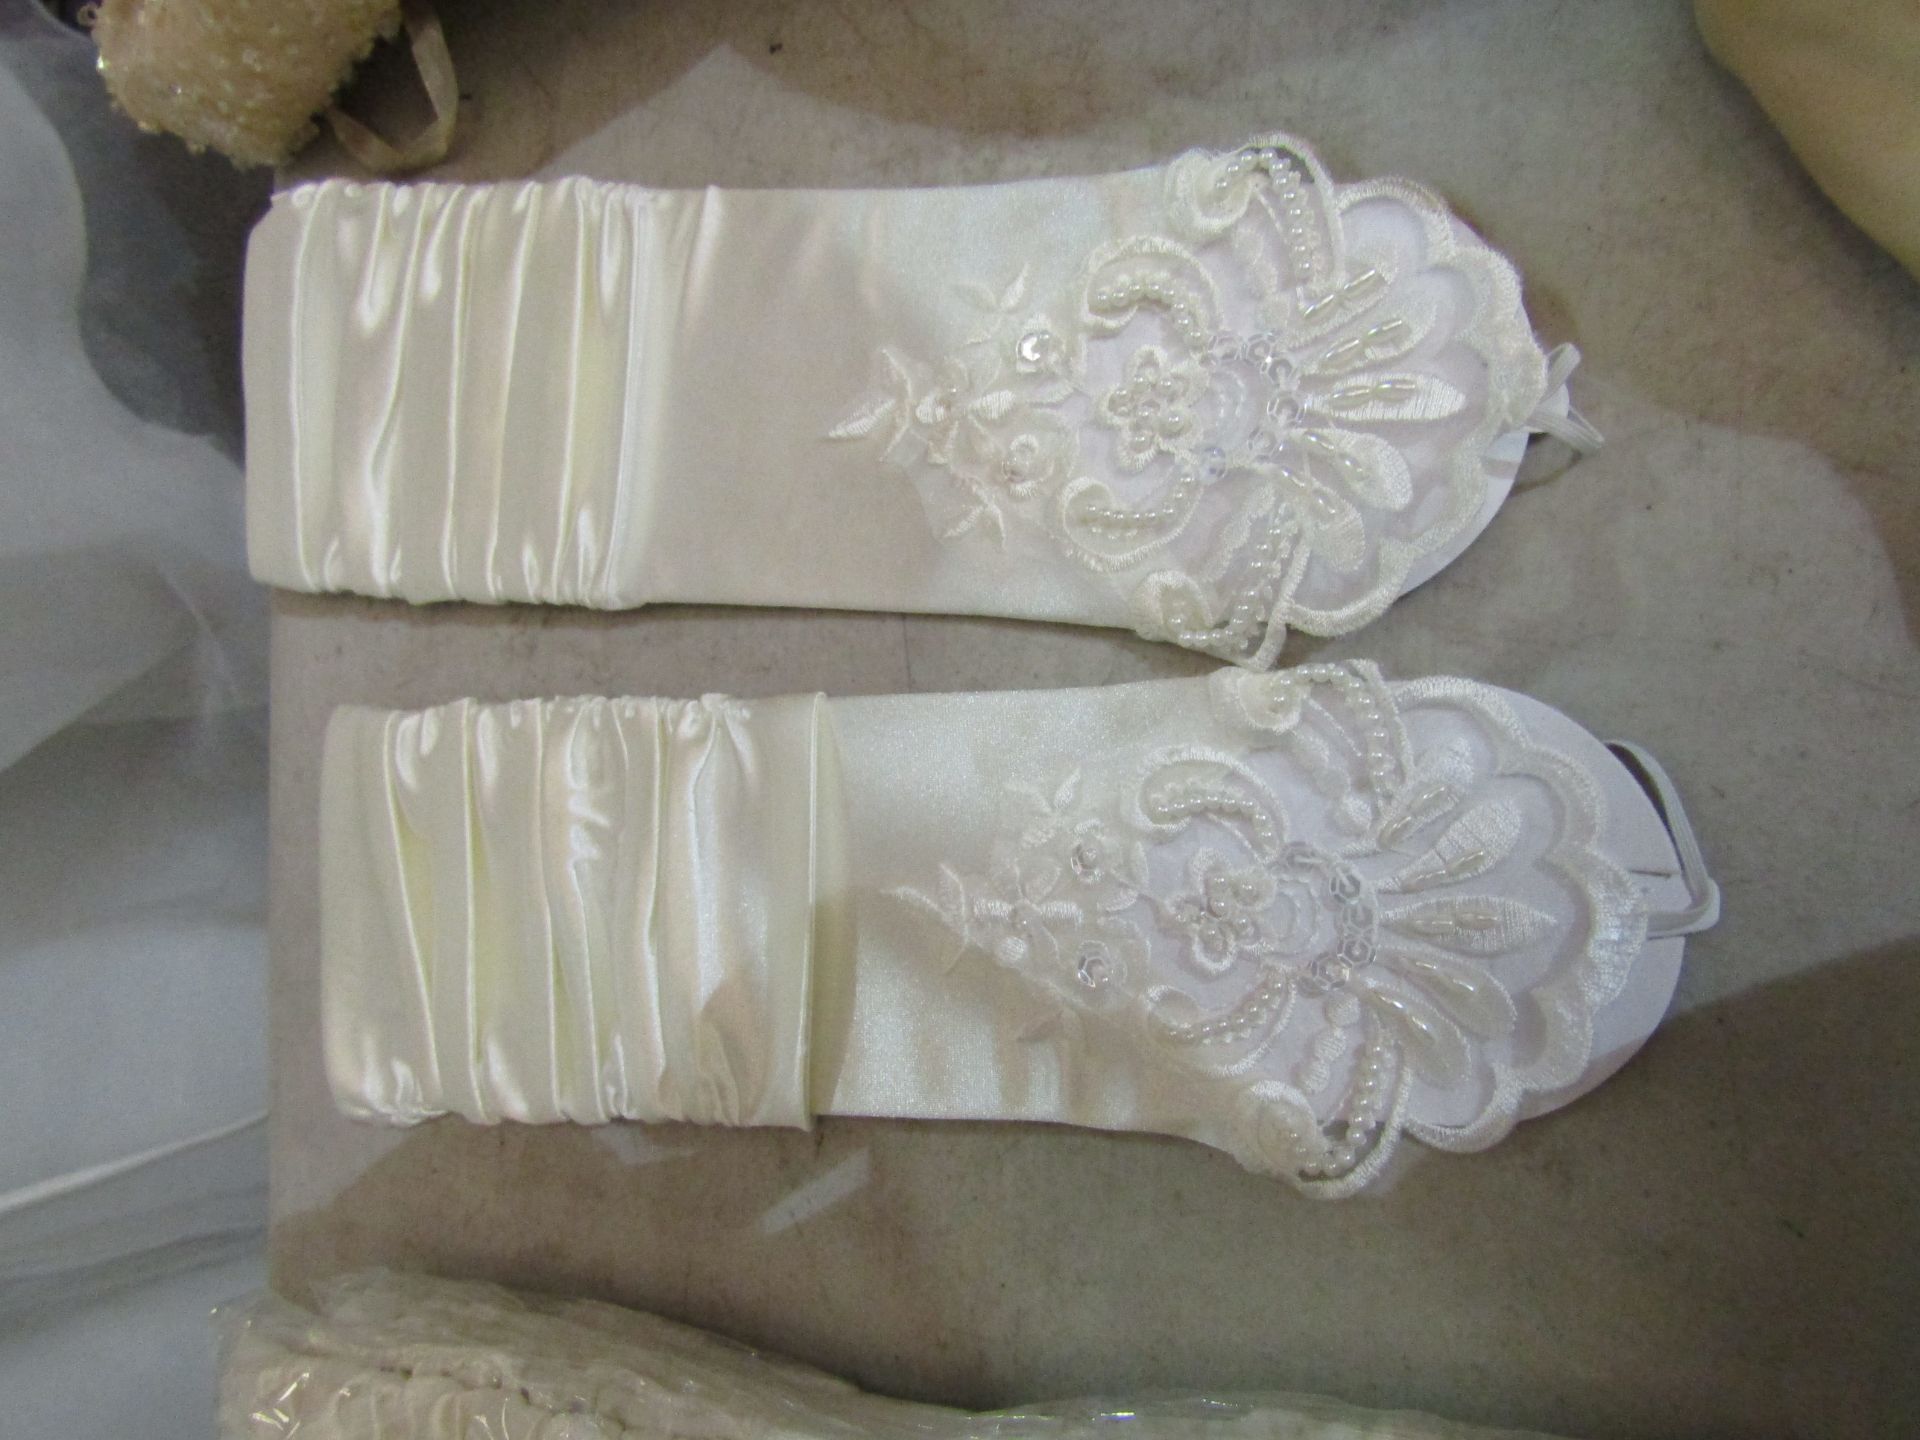 Approx 500 pieces of wedding shop stock to include wedding dresses, mother of the bride, dresses, - Image 25 of 108